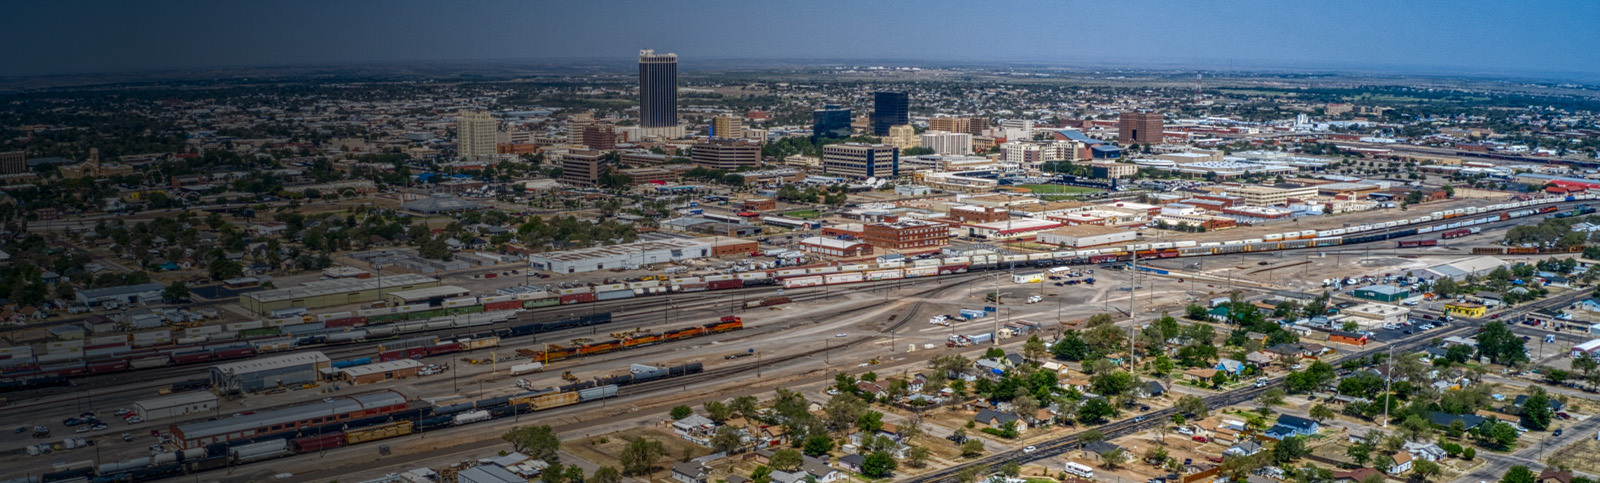 Aerial view of downtown Amarillo, Texas.